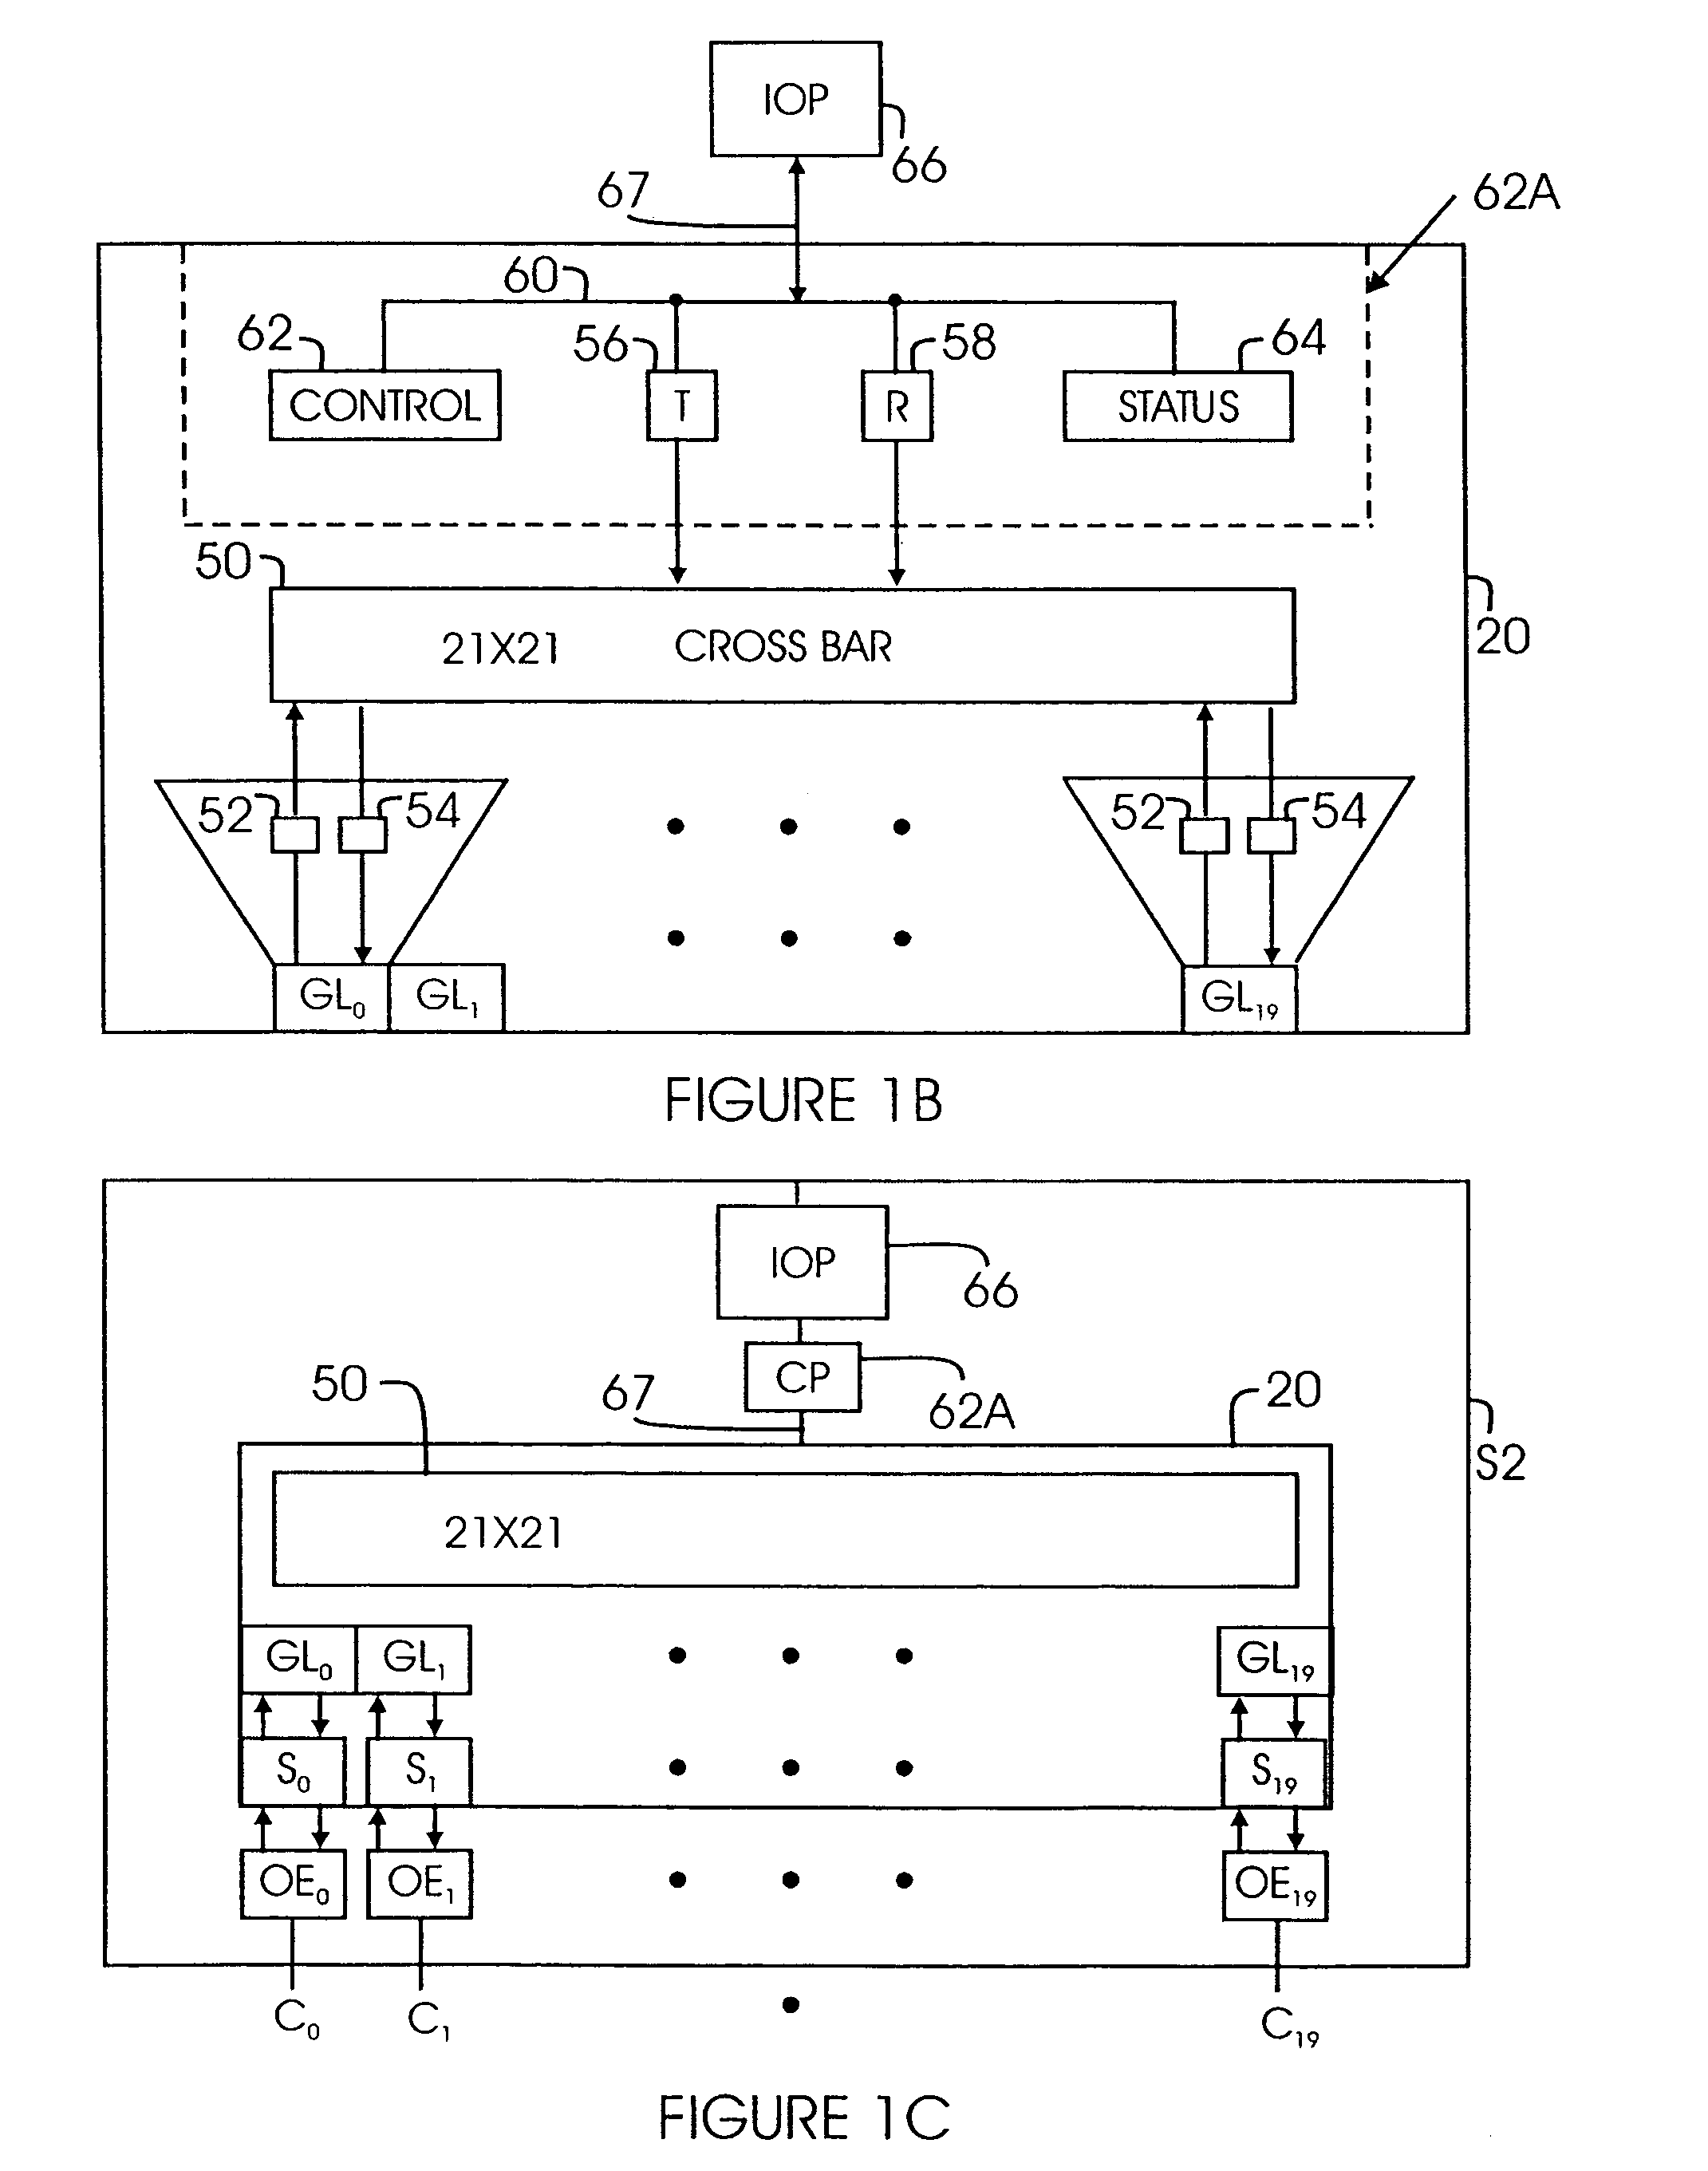 Method and system for monitoring events in storage area networks